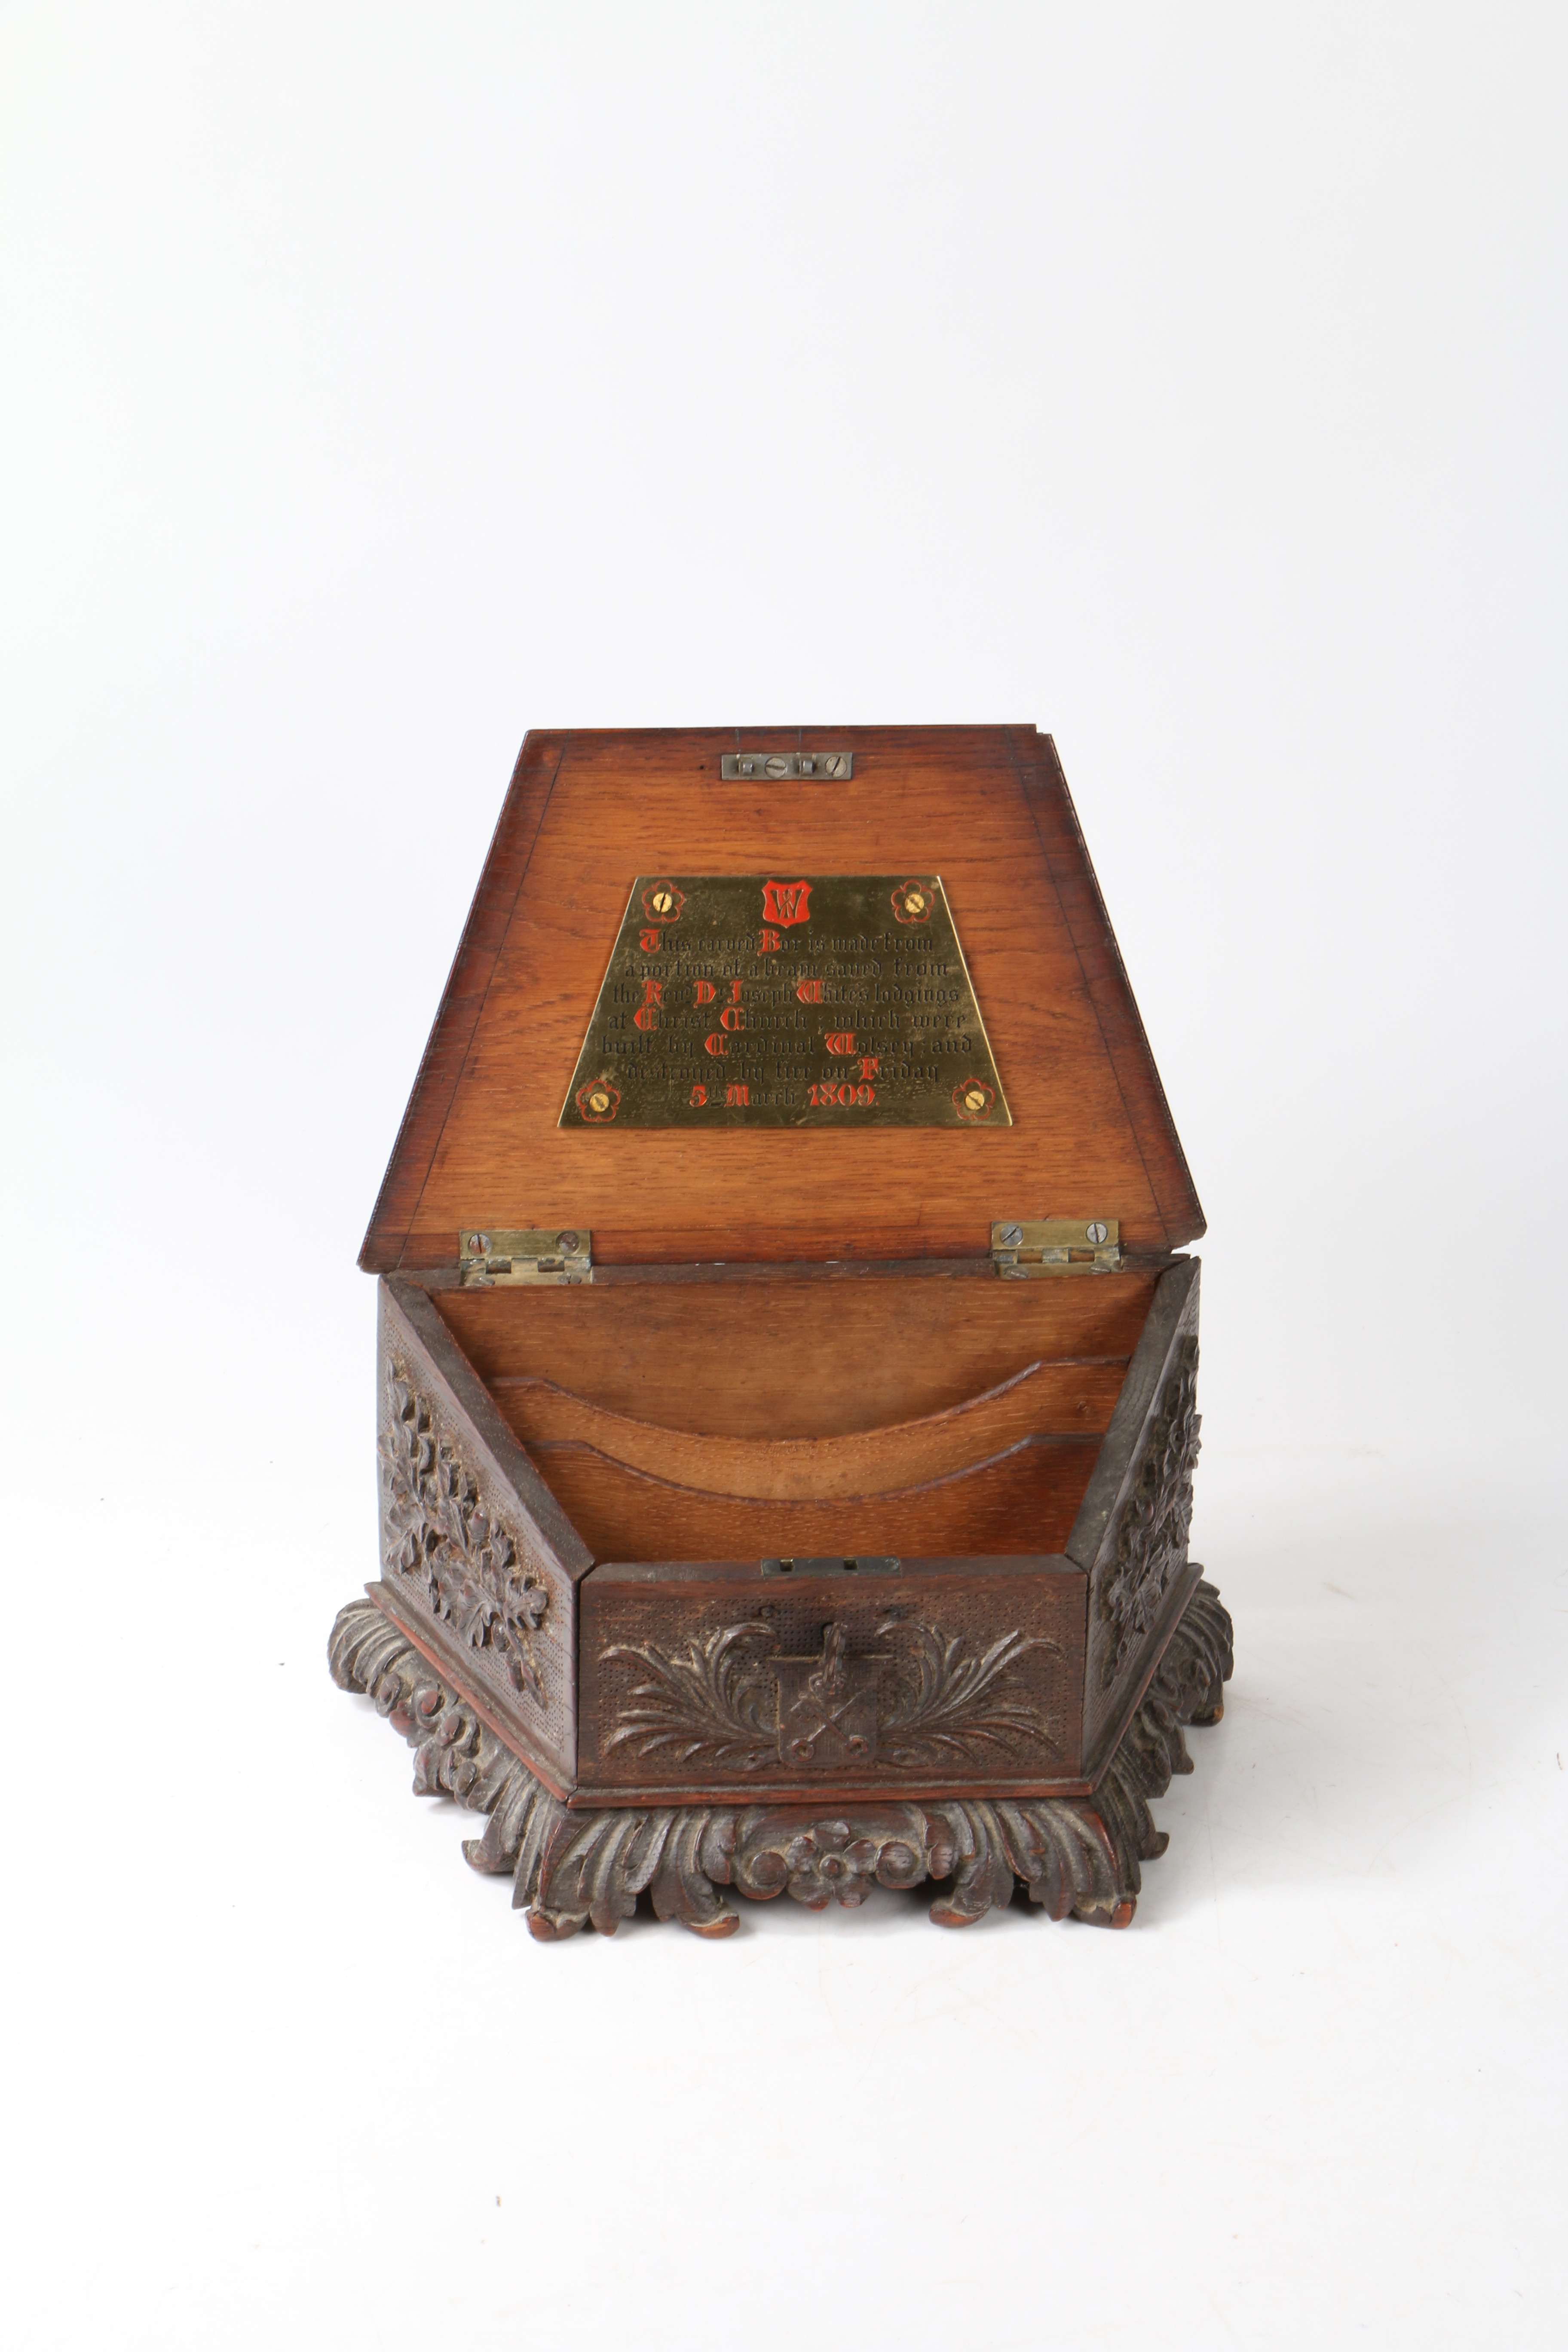 CHRIST CHURCH INTEREST - A 19TH CENTURY CARVED OAK BOX. - Image 8 of 10